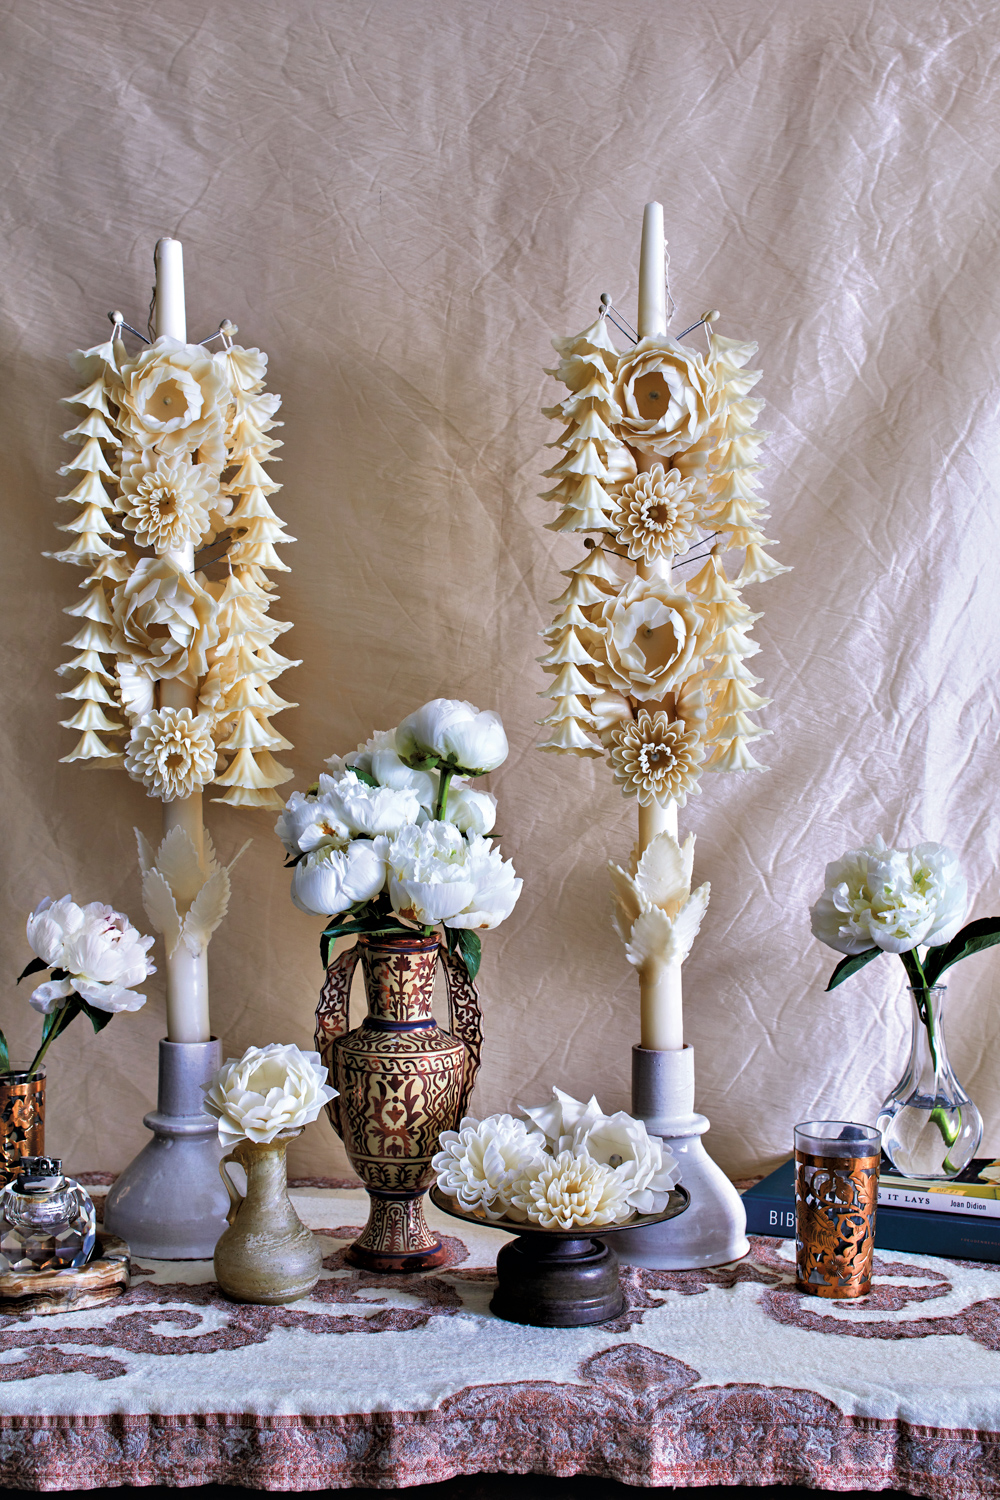 Candles sculpted into floral shapes from sun-bleached beeswax atop a tablescape by Zoë Gowen